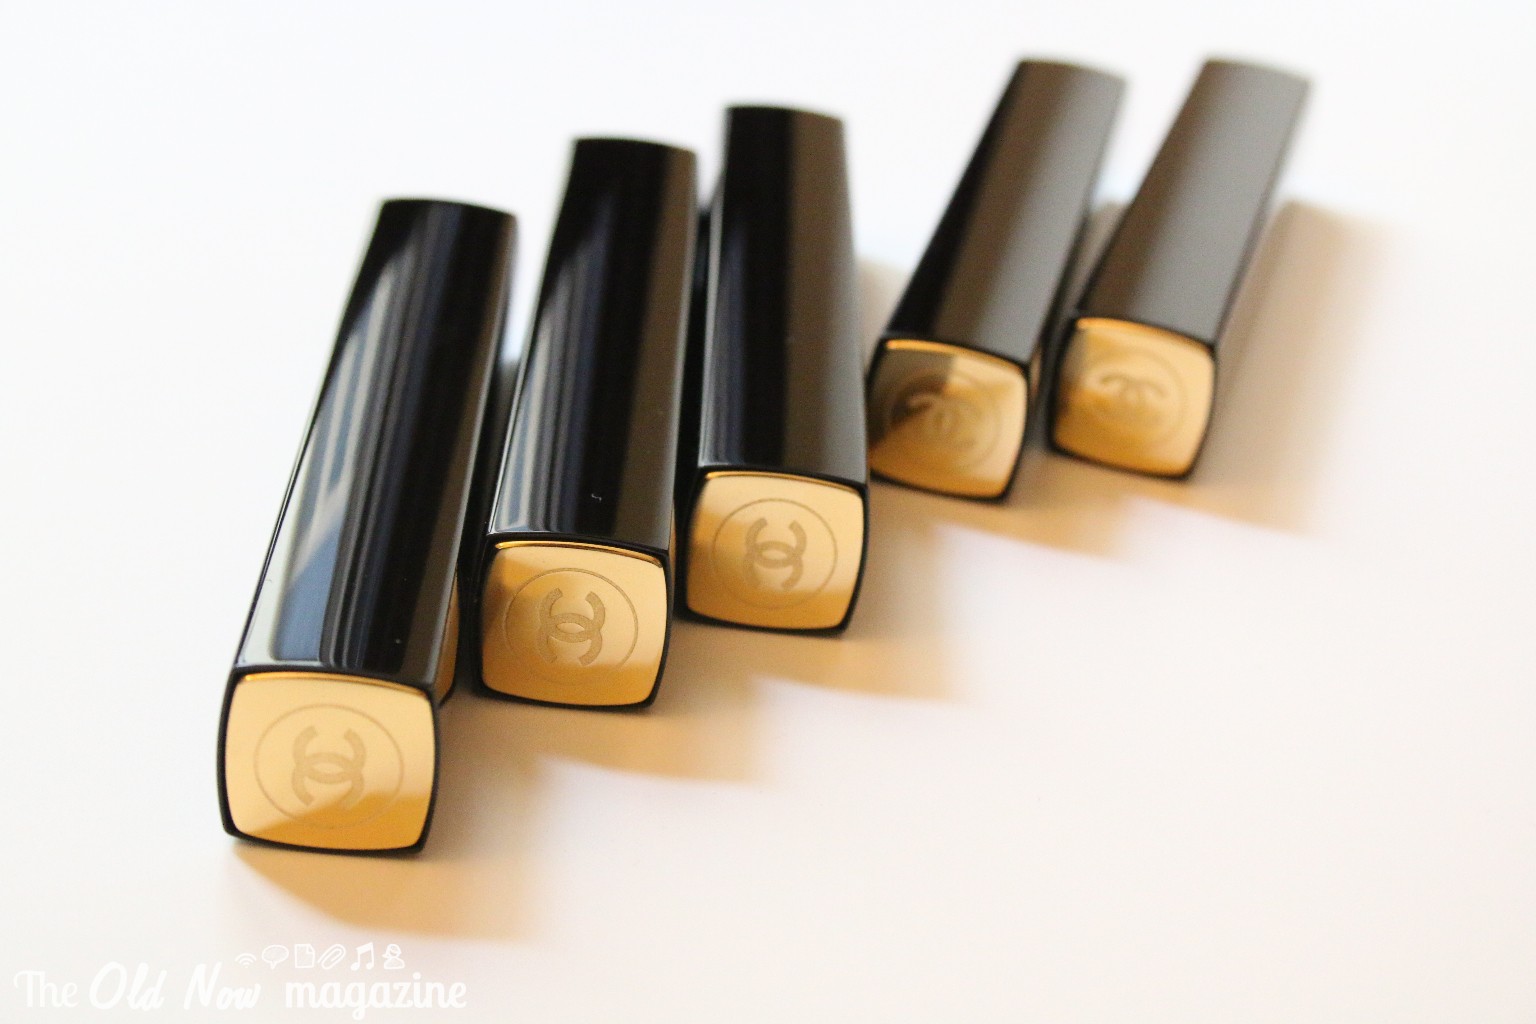 CHANEL ROUGE ALLURE GLOSS THEOLDNOW (2)